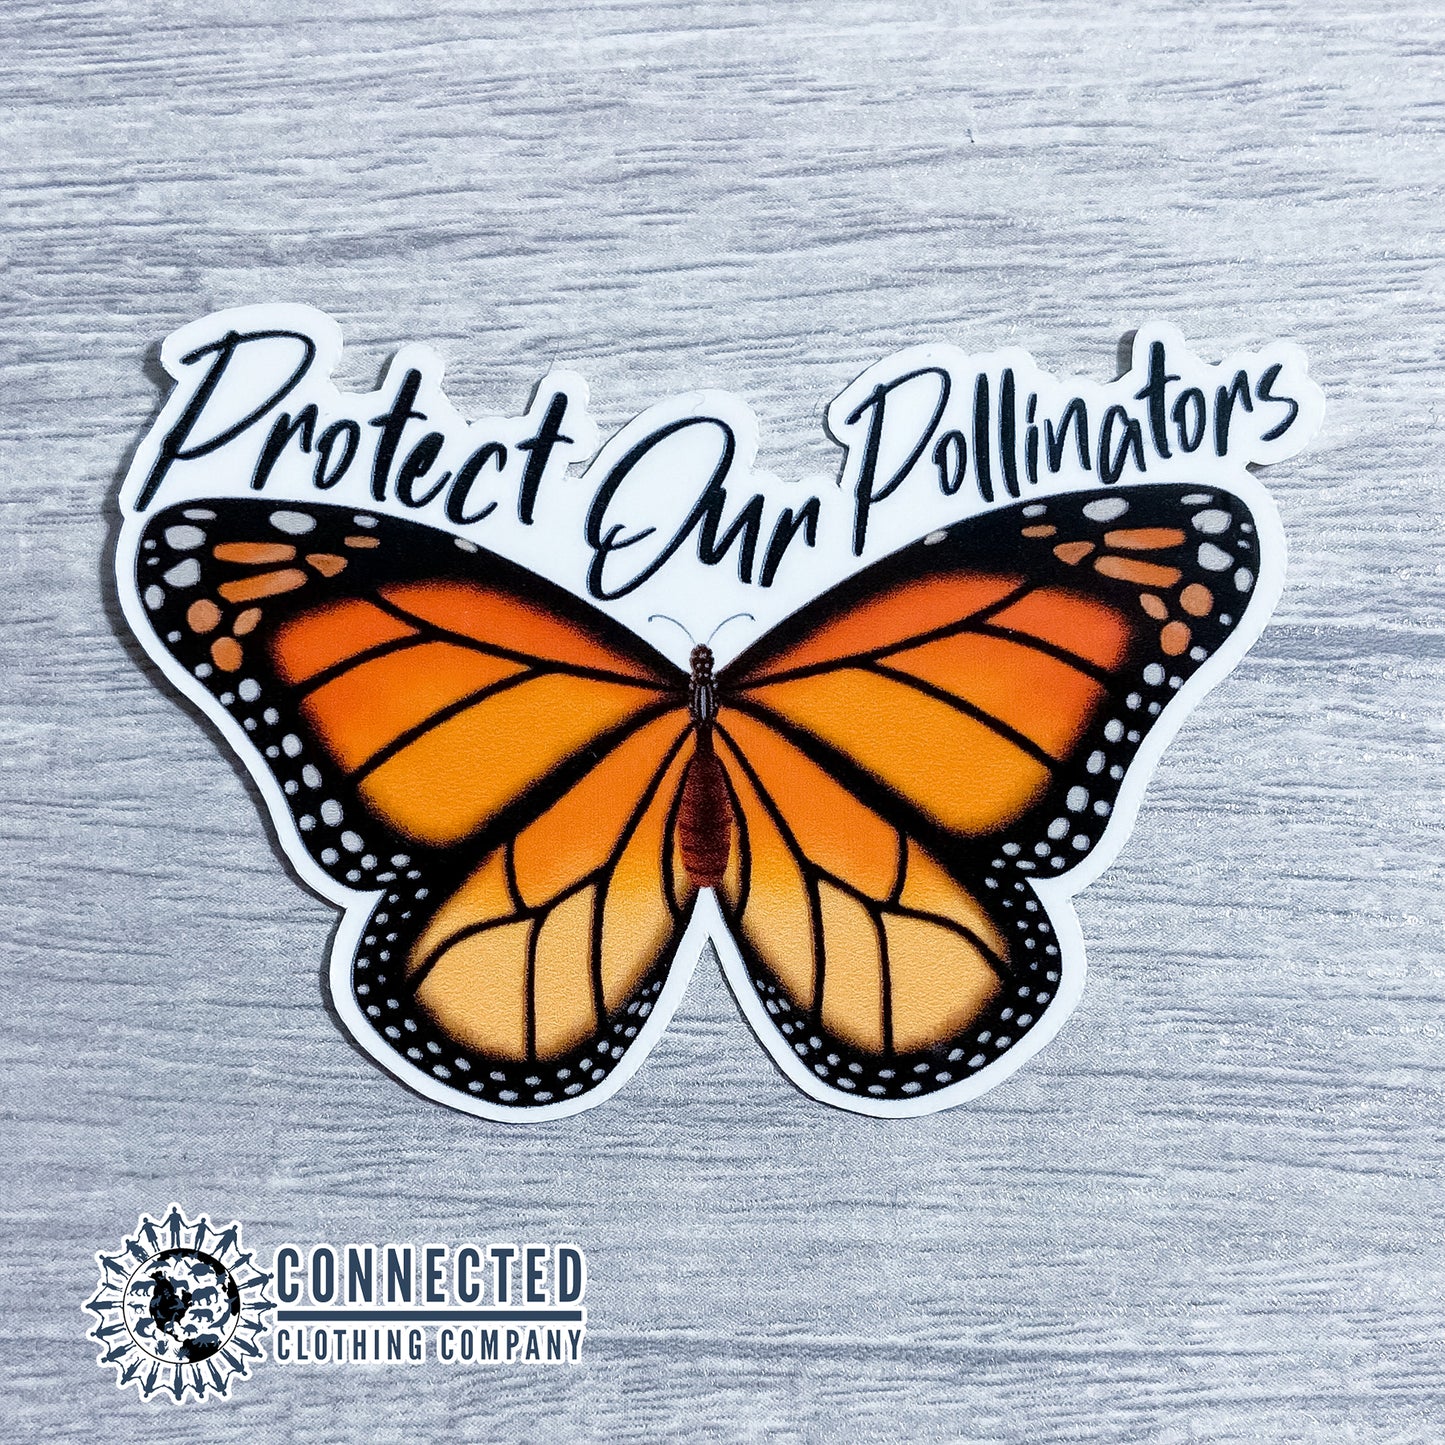 Protect Our Pollinators Sticker - Connected Clothing Company - Ethically and Sustainably Made - 10% of profits donated to pollinator and monarch conservation and ocean conservation